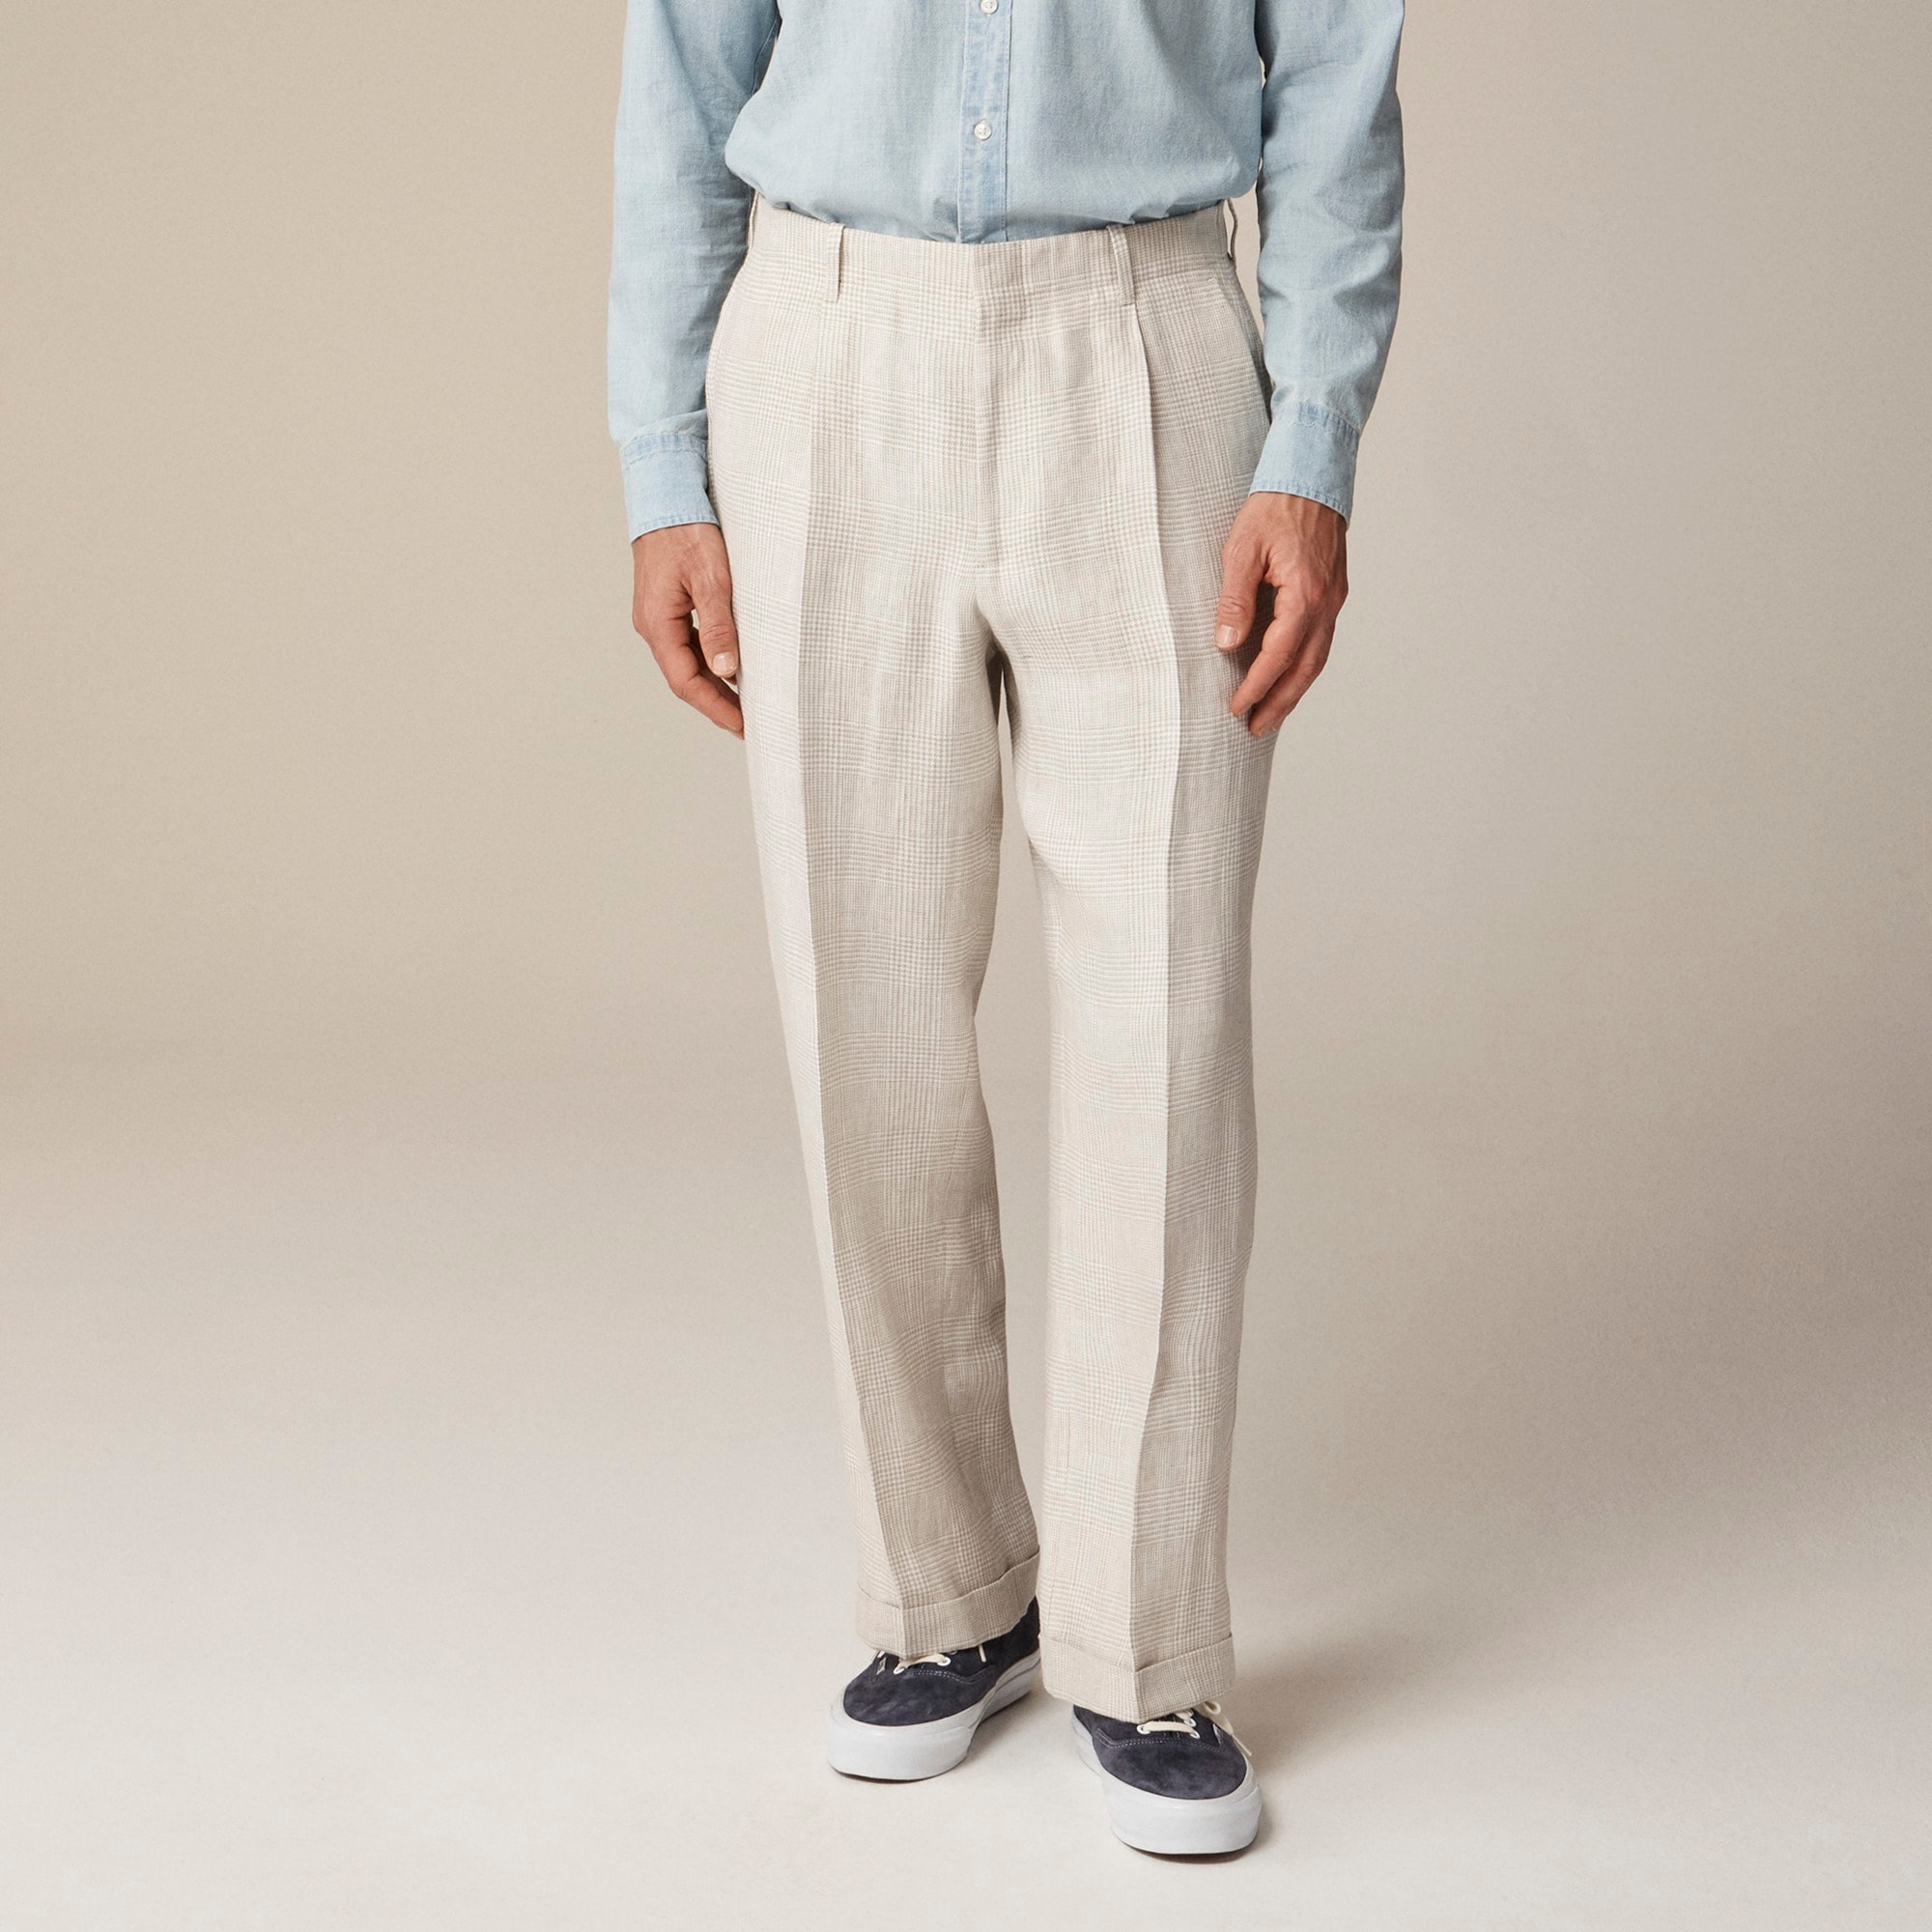  Big-fit pleated suit pant in linen twill glen plaid